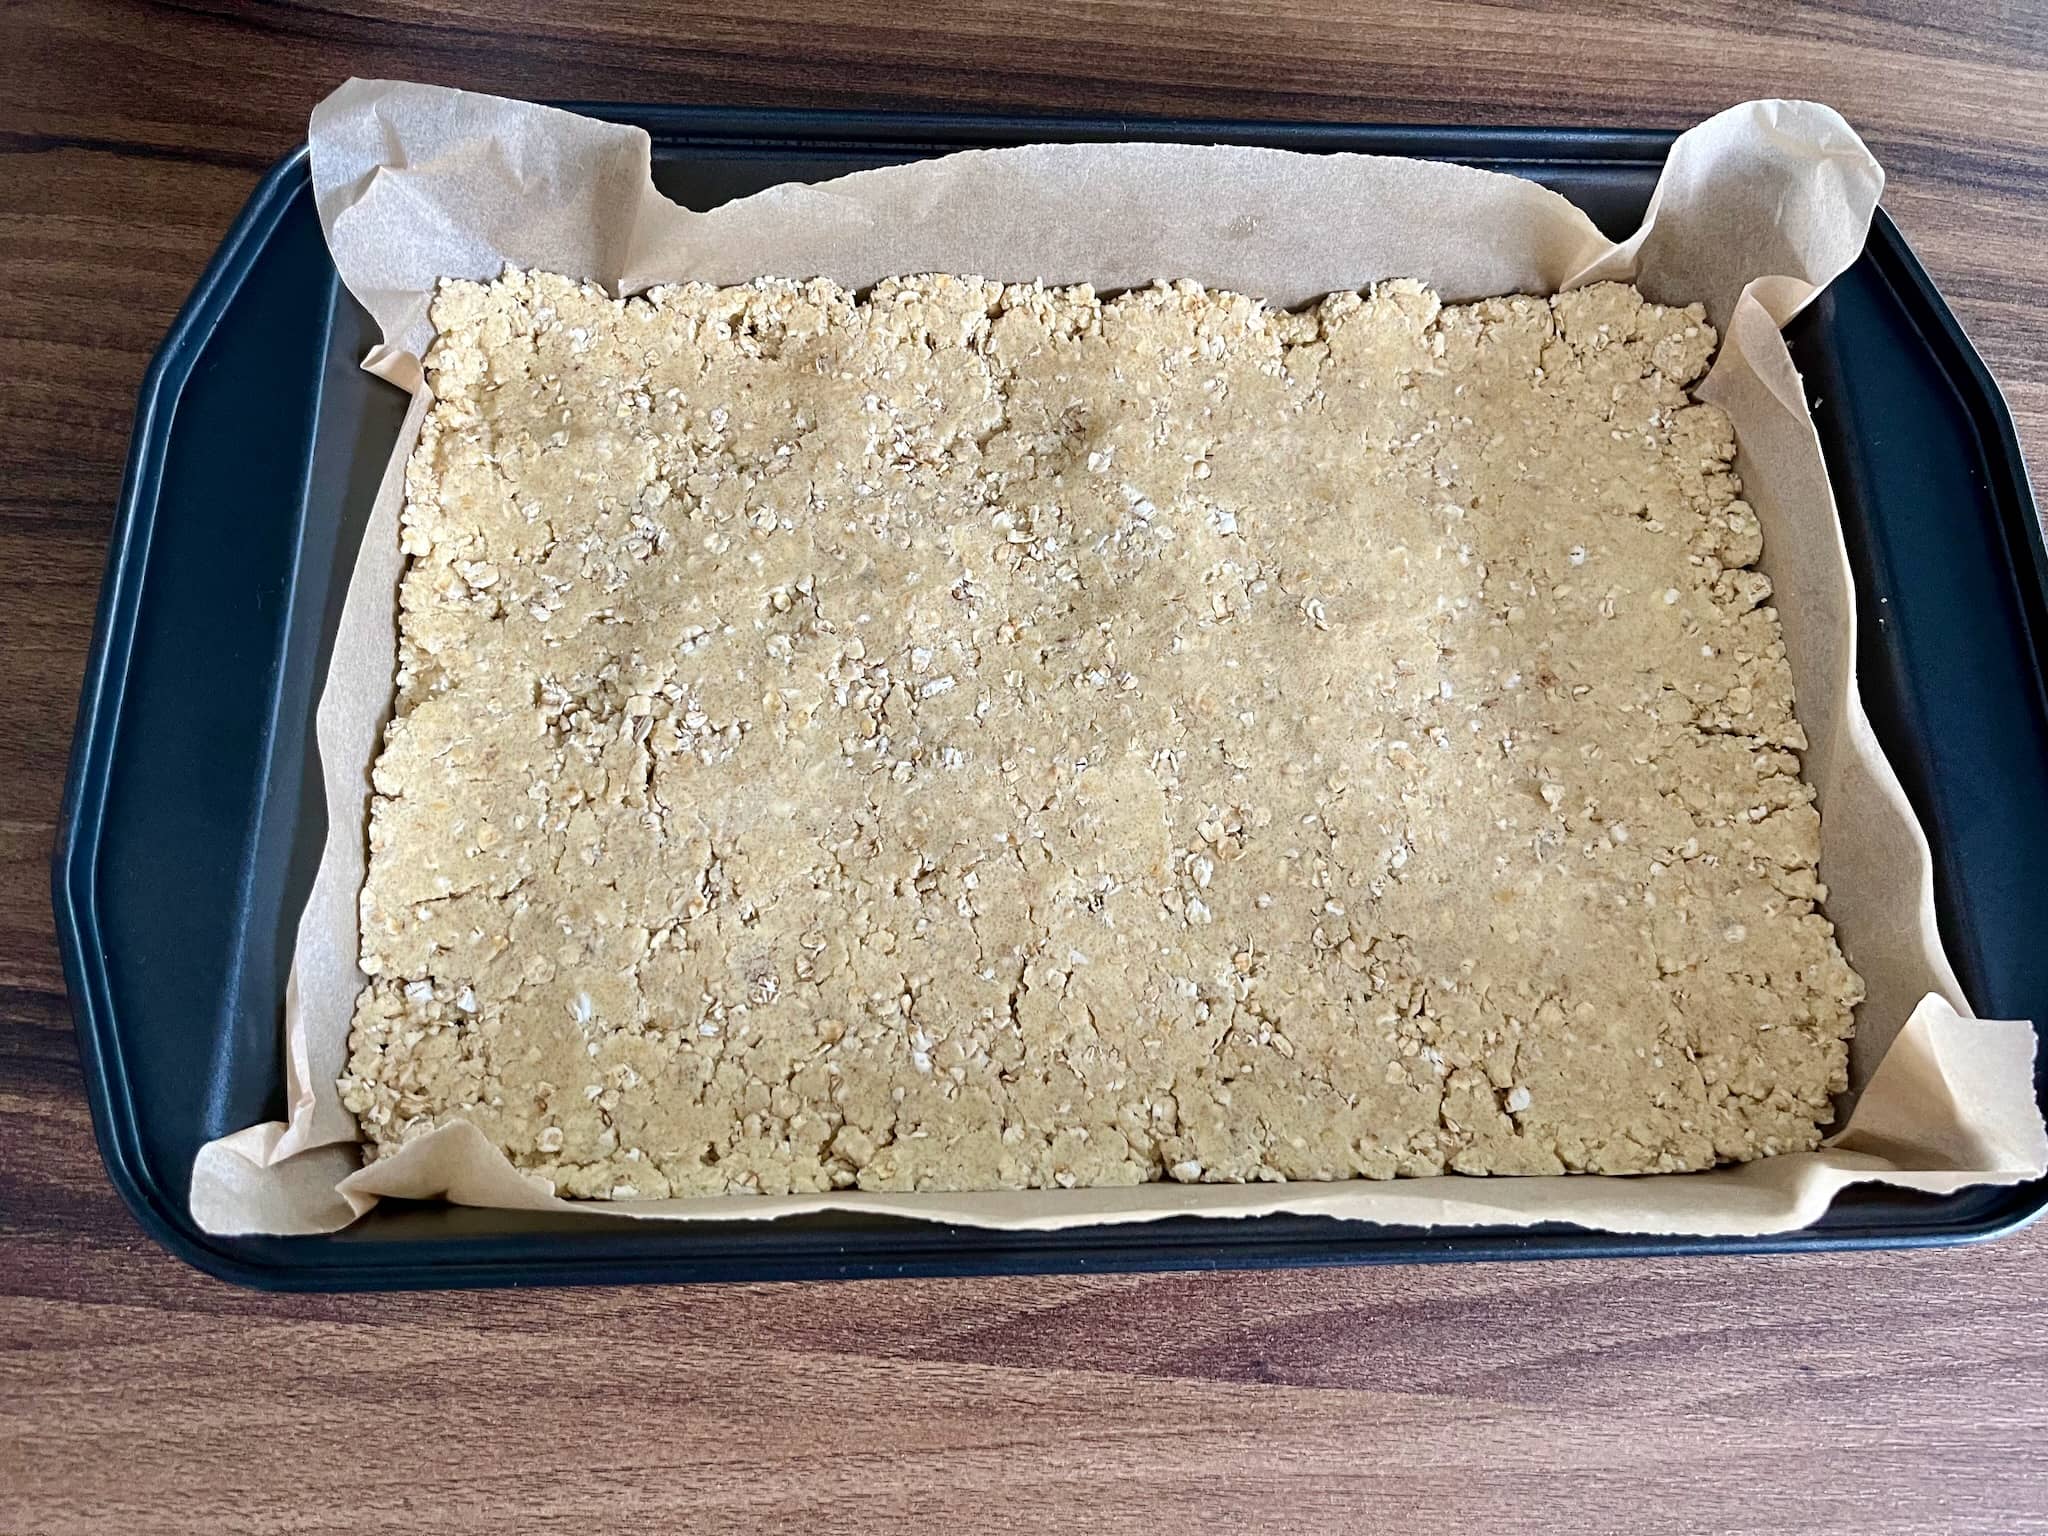 Oat dough flattens and even out in the tray